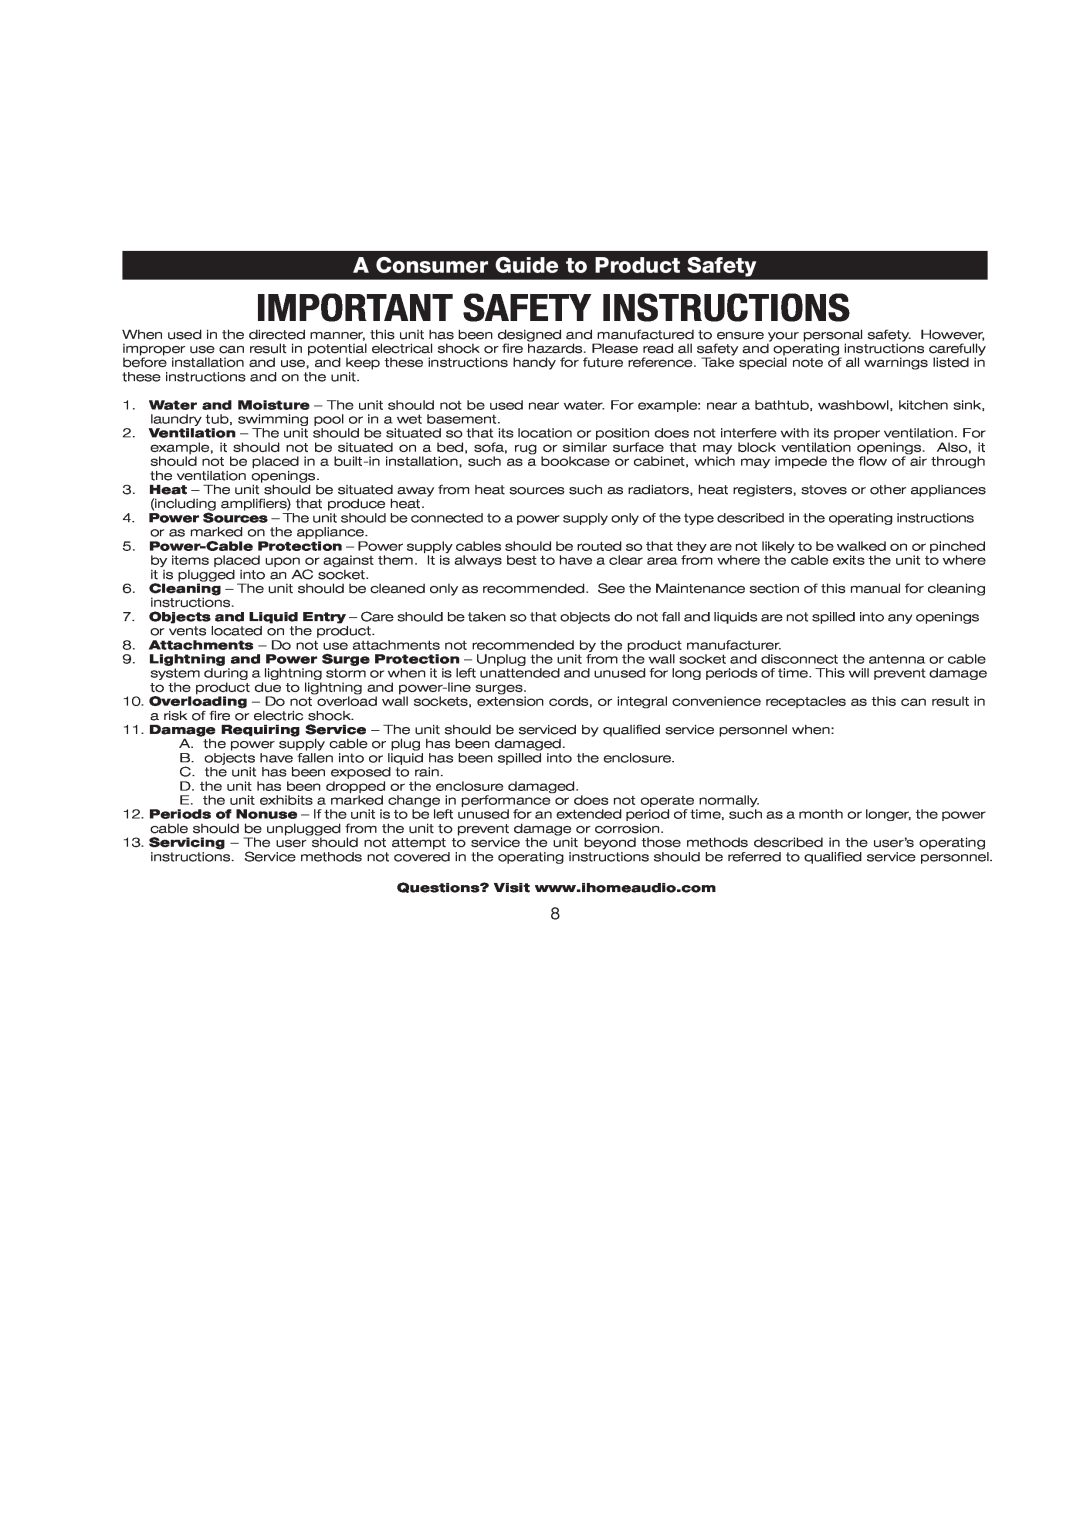 iHome iP11 manual A Consumer Guide to Product Safety 